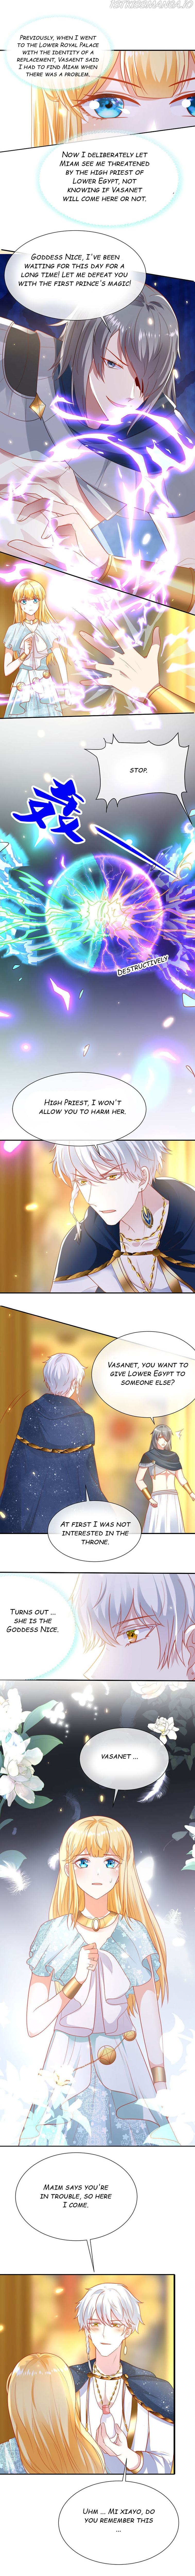 Pharaoh's First Favorite Queen - Page 2